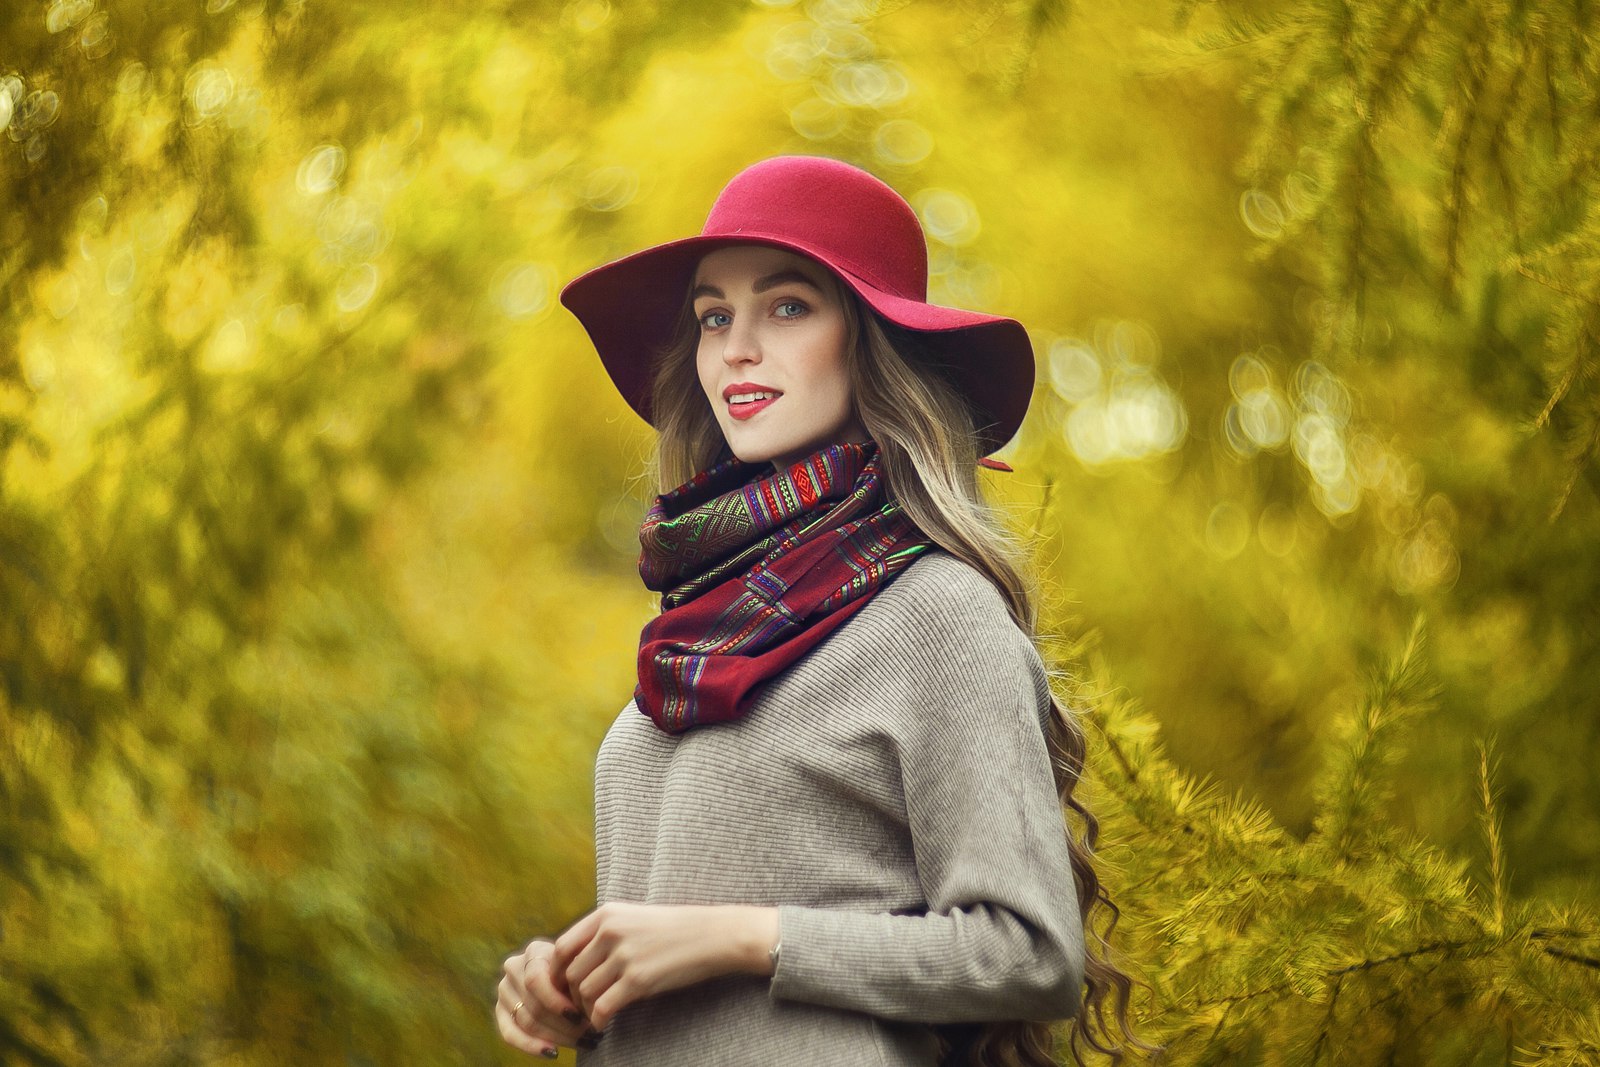 Nature Plants Hat Women Women Outdoors Maxim Makarov Model Smiling Red Hat Millinery Women With Hats 1600x1067